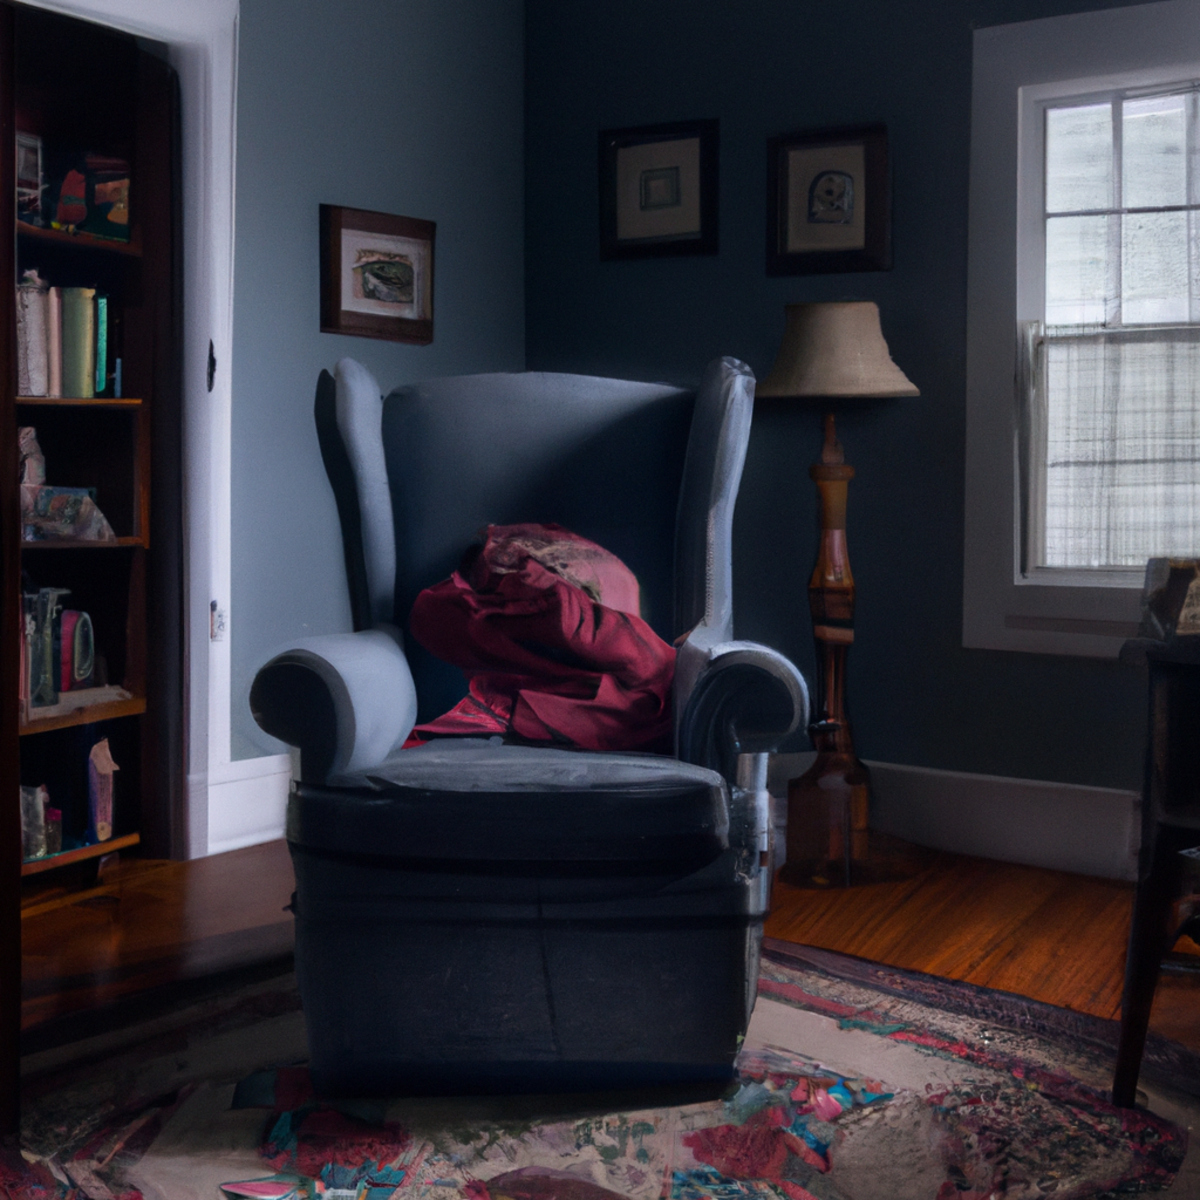 A serene living room with a cozy armchair, books, artwork, and a soothing lamp, symbolizing coping strategies and support.